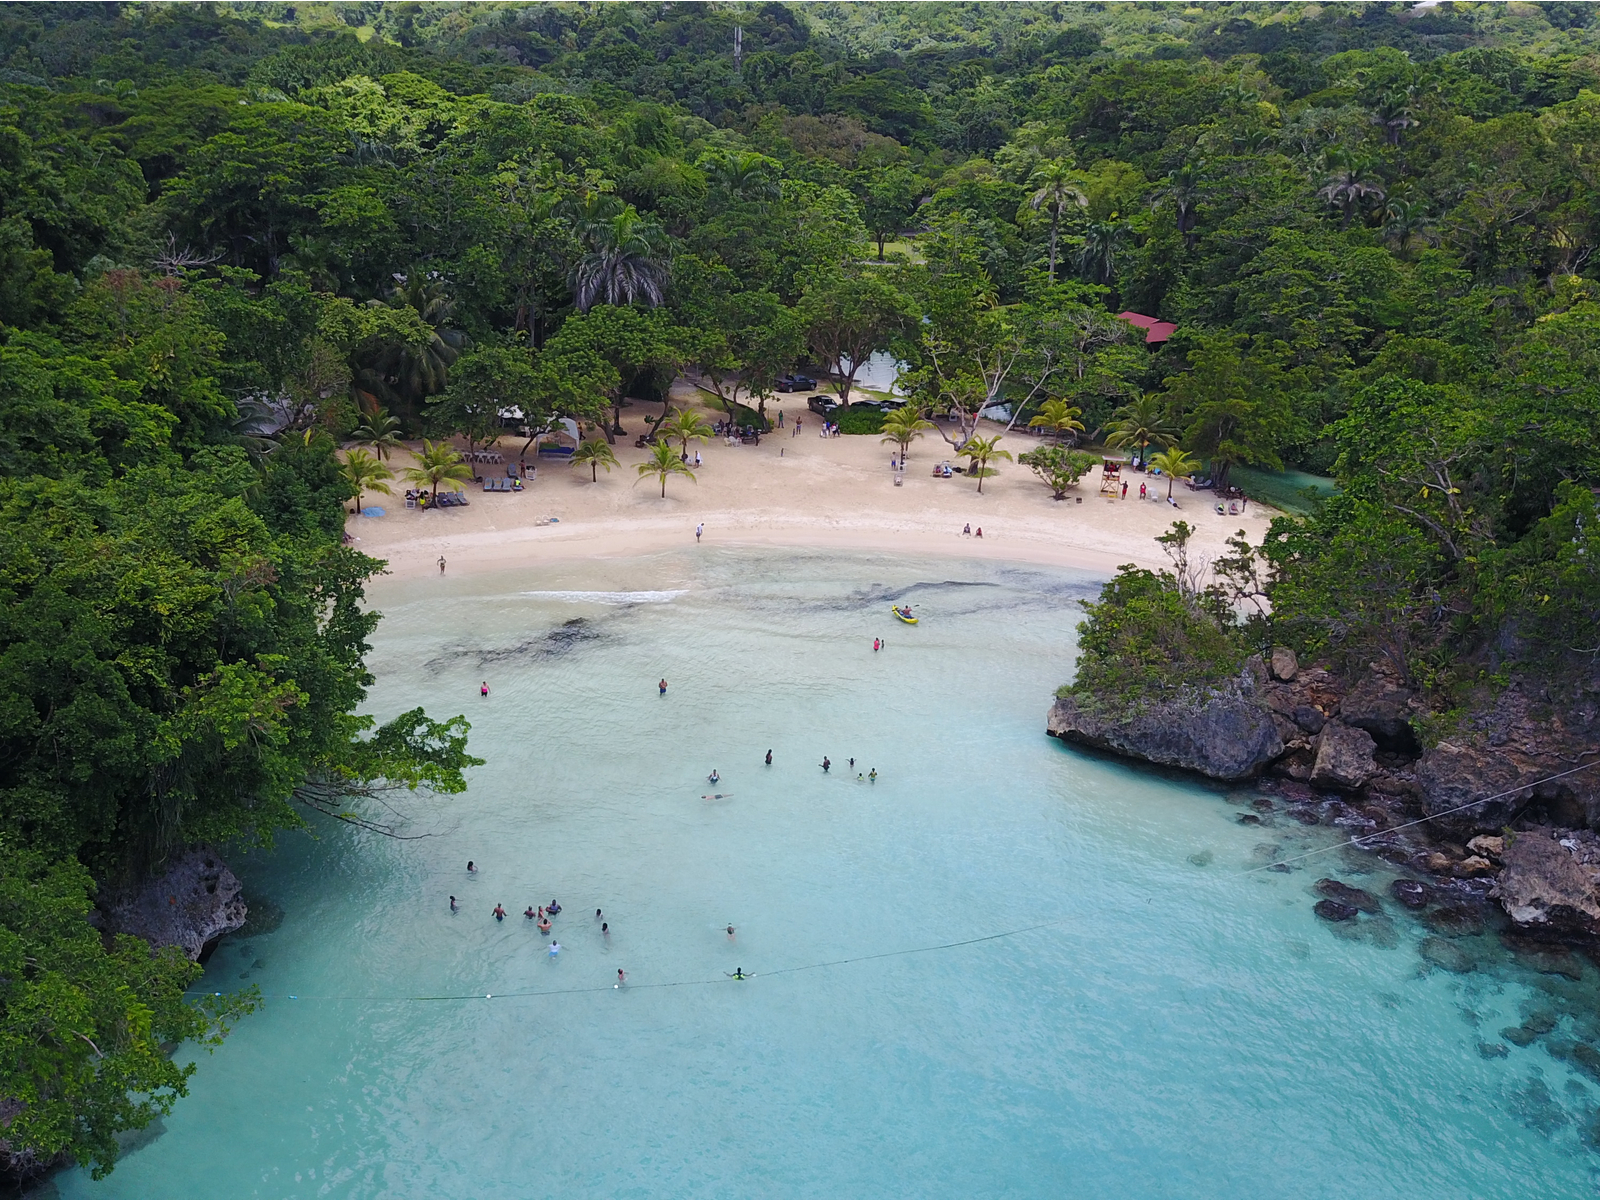 Frenchman's Cove, one of the best beaches in Jamaica, as seen from an aerial shot